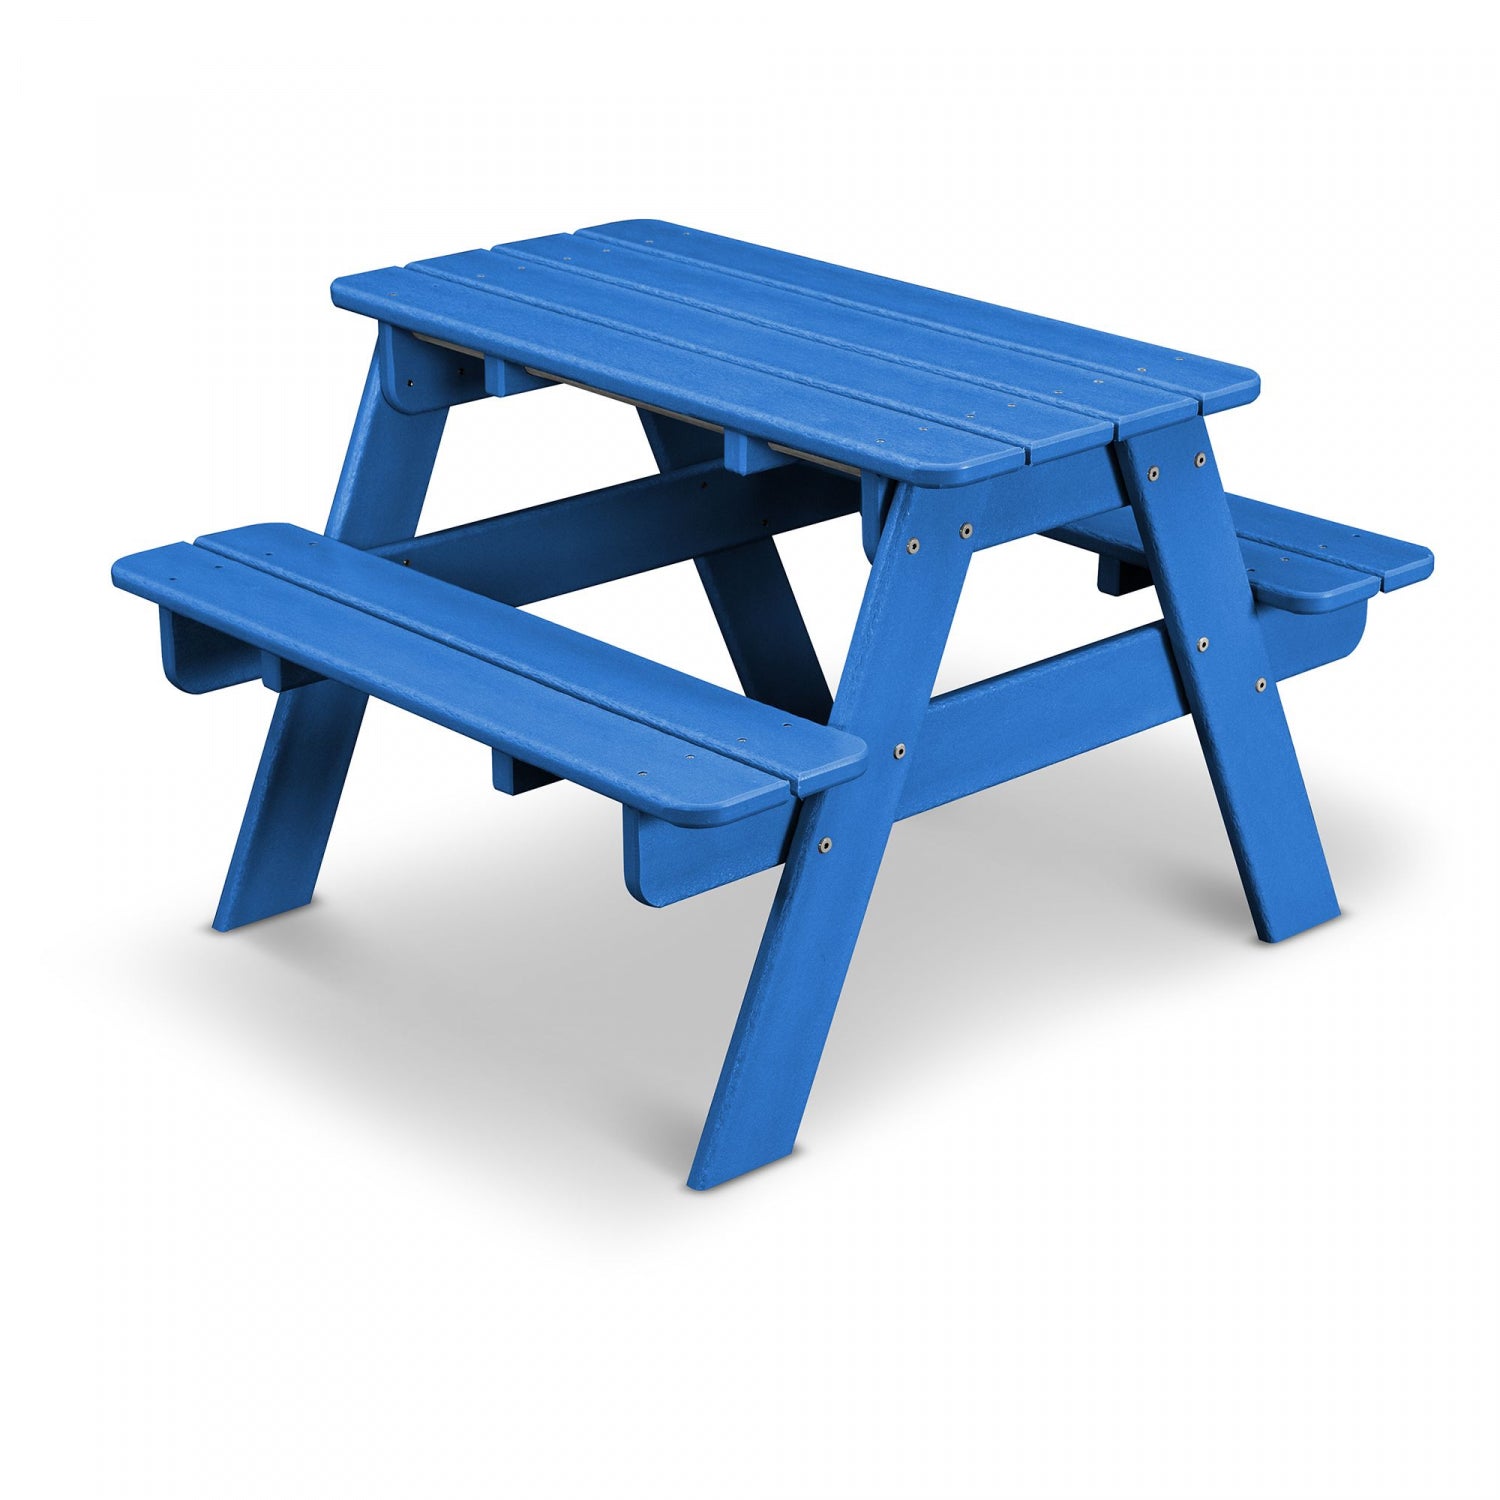 Family Picnic Table stock illustrations